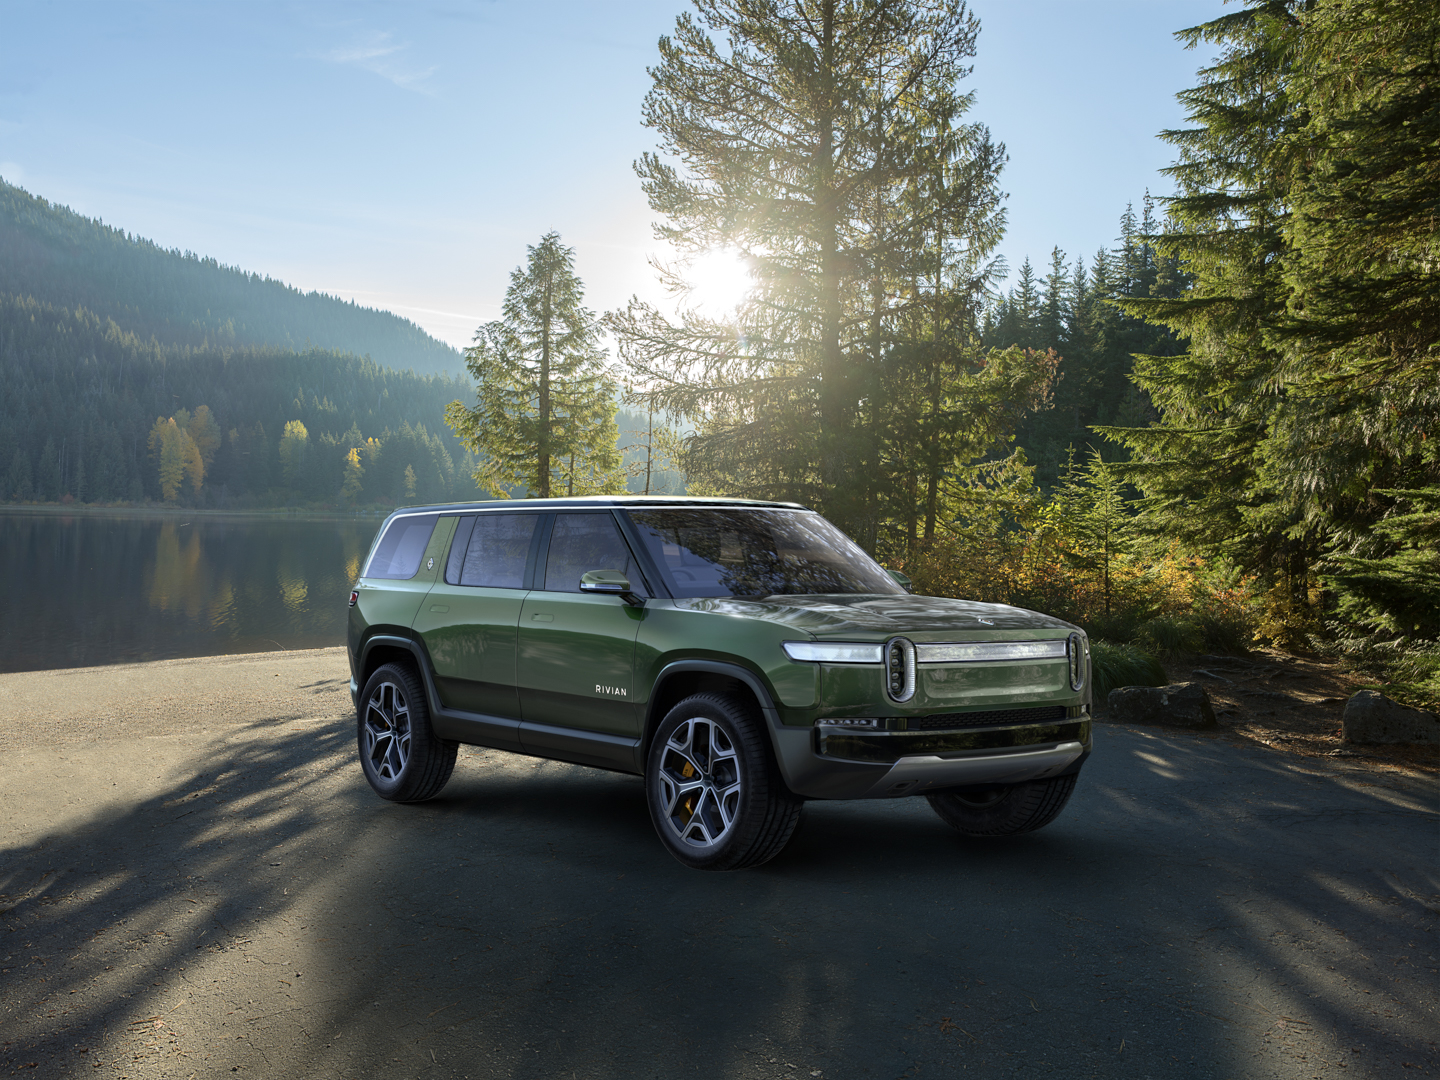 Uncover the Truth Behind the Car and Driver Comparison of the Rivian R1S and BMW iX